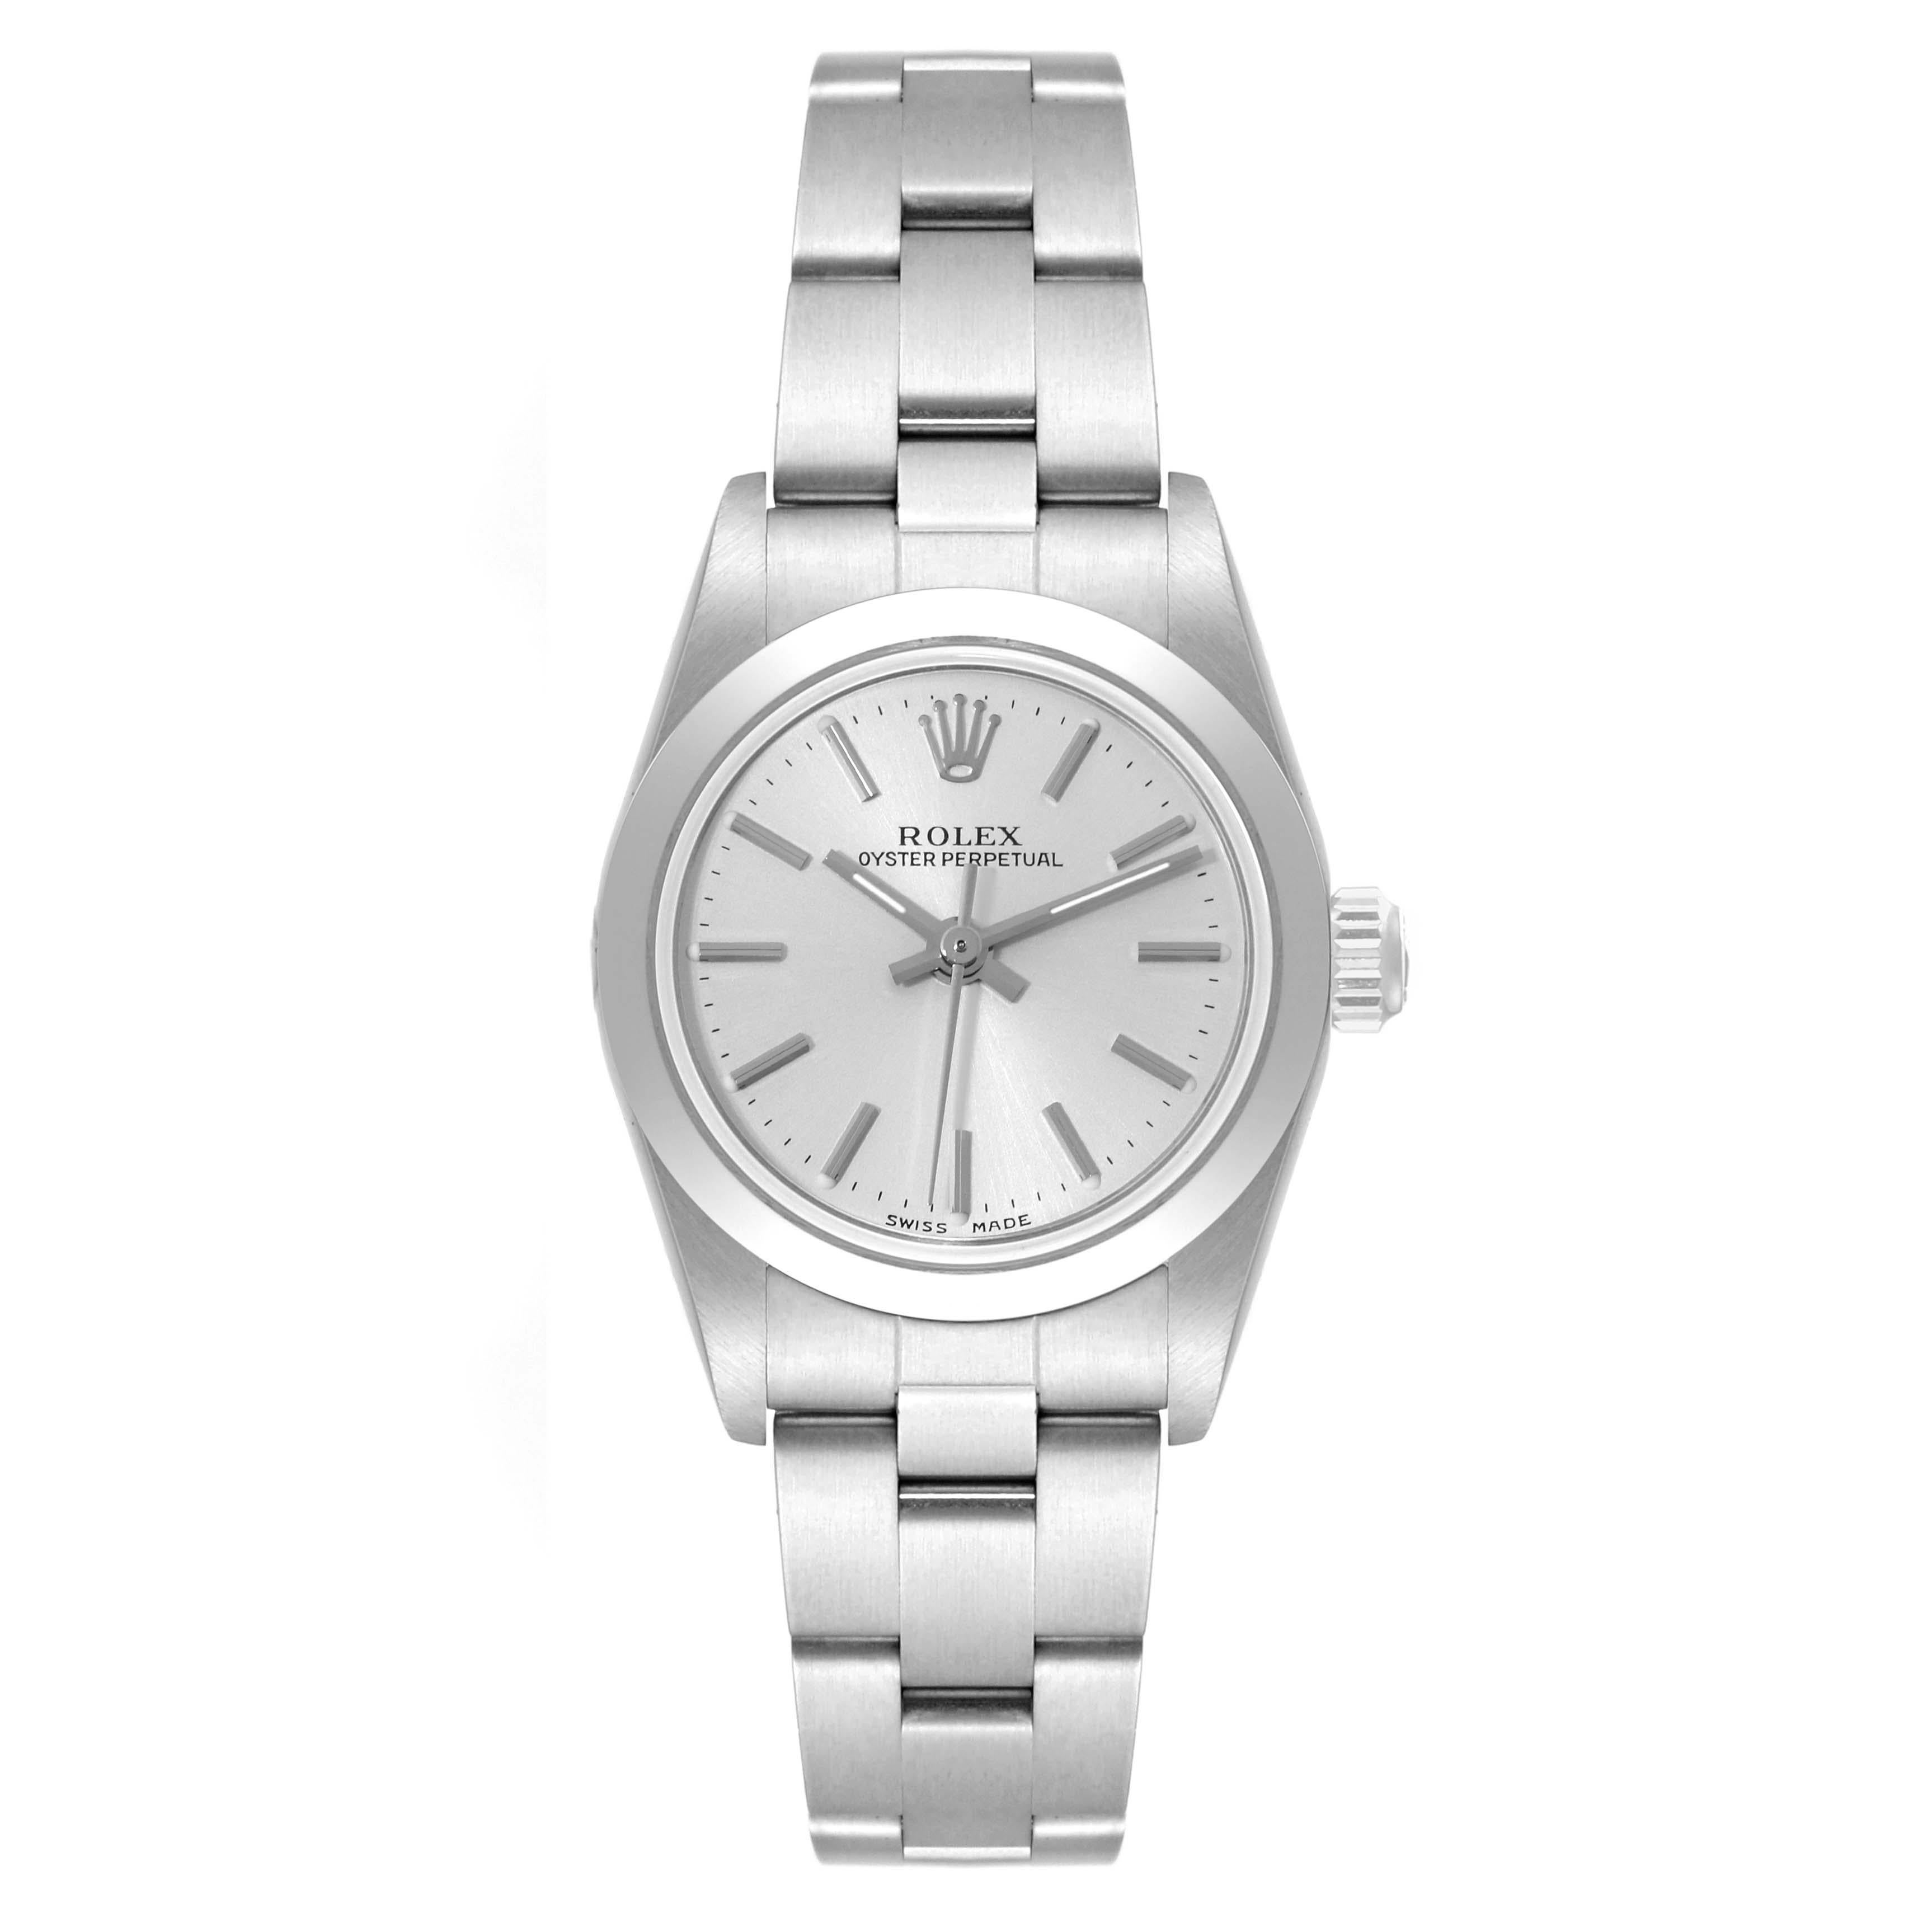 Rolex Oyster Perpetual Non-Date Silver Dial Steel Ladies Watch 76080. Officially certified chronometer automatic self-winding movement. Stainless steel oyster case 24 mm in diameter. Rolex logo on the crown. Stainless steel smooth bezel. Scratch